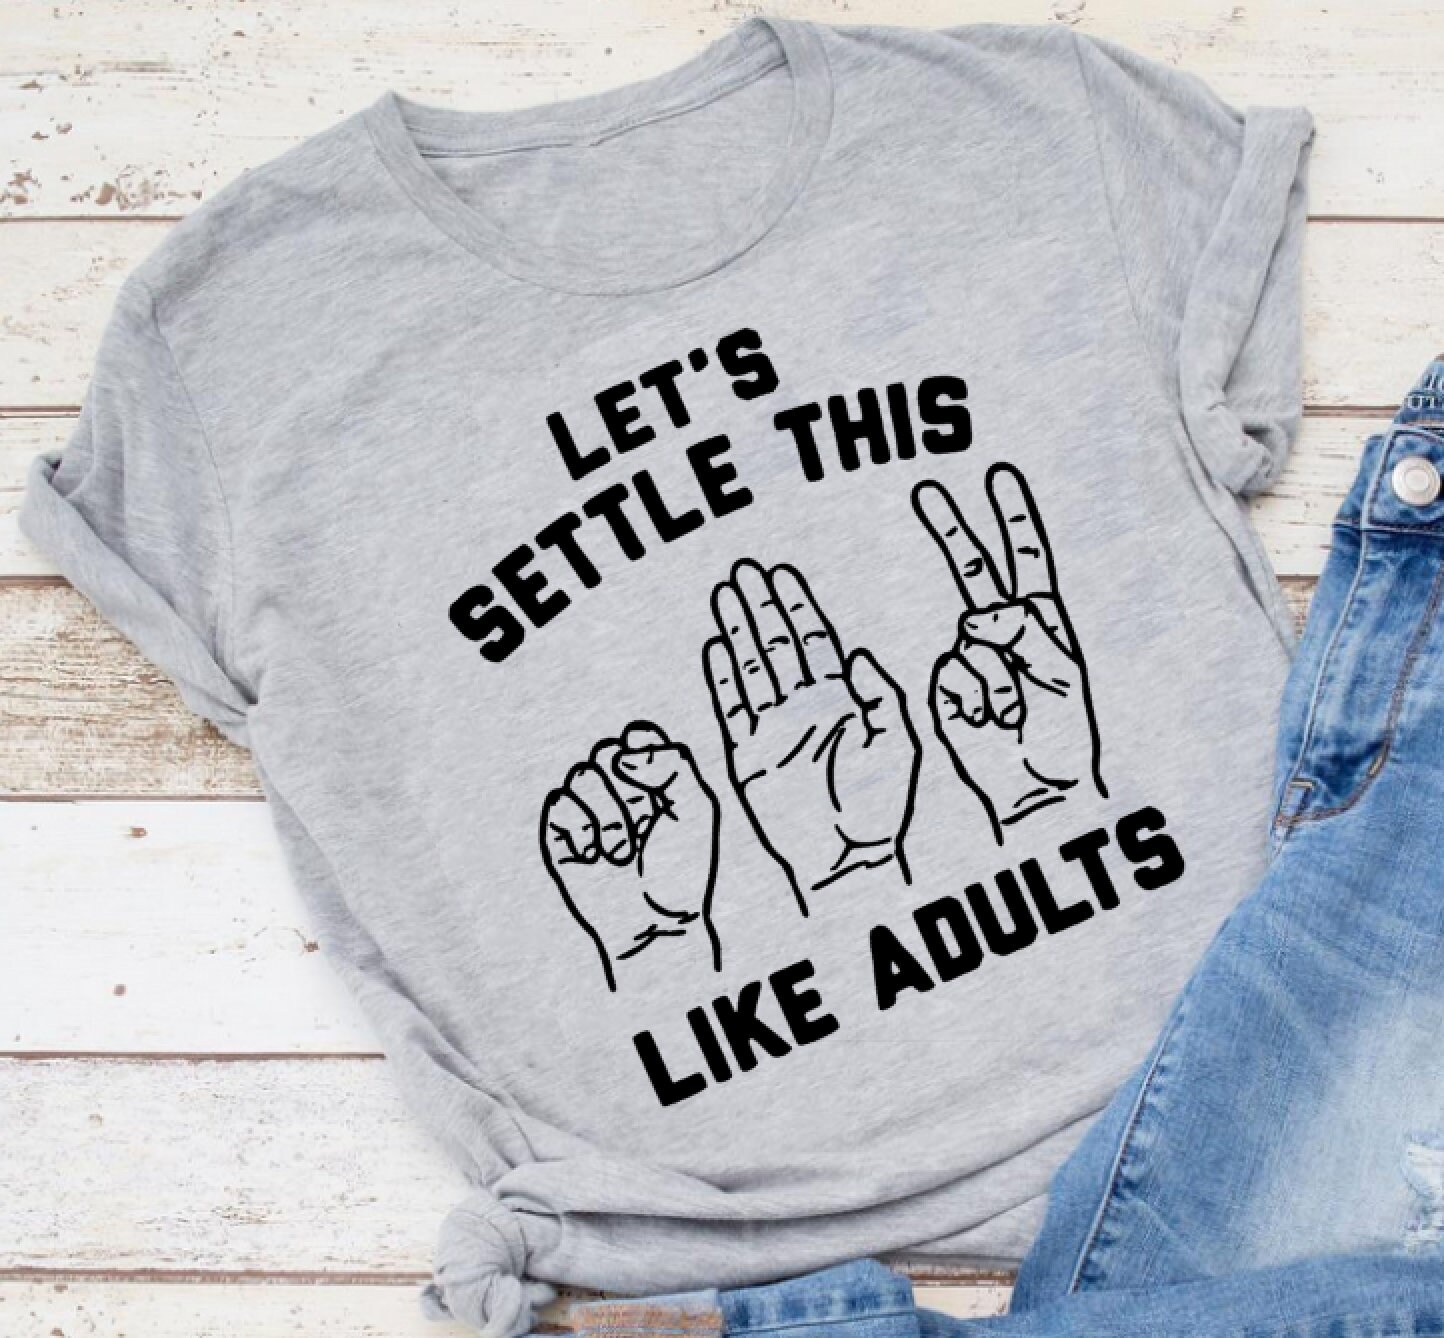 Let's settle this like adults (rock, paper, scissors)